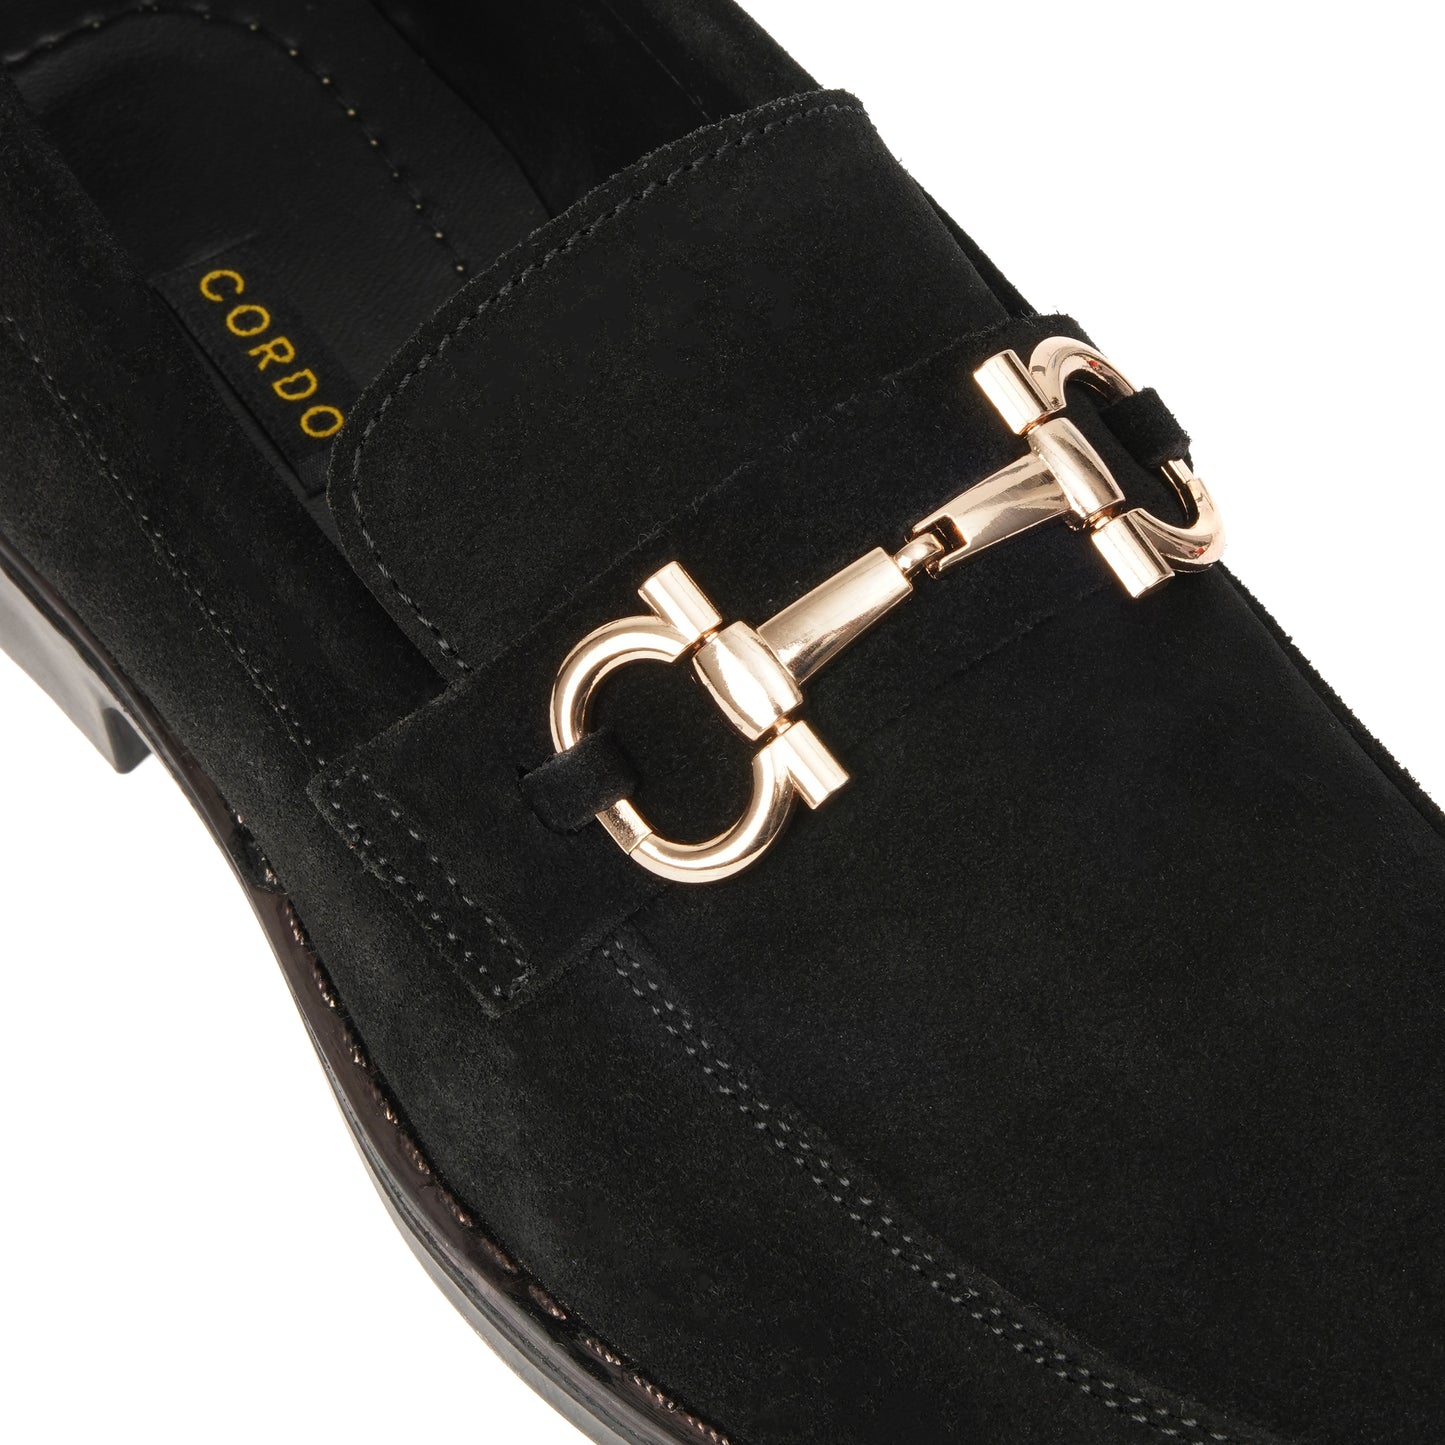 CS007-Black Cow Suede Loafers | Super Comfortable